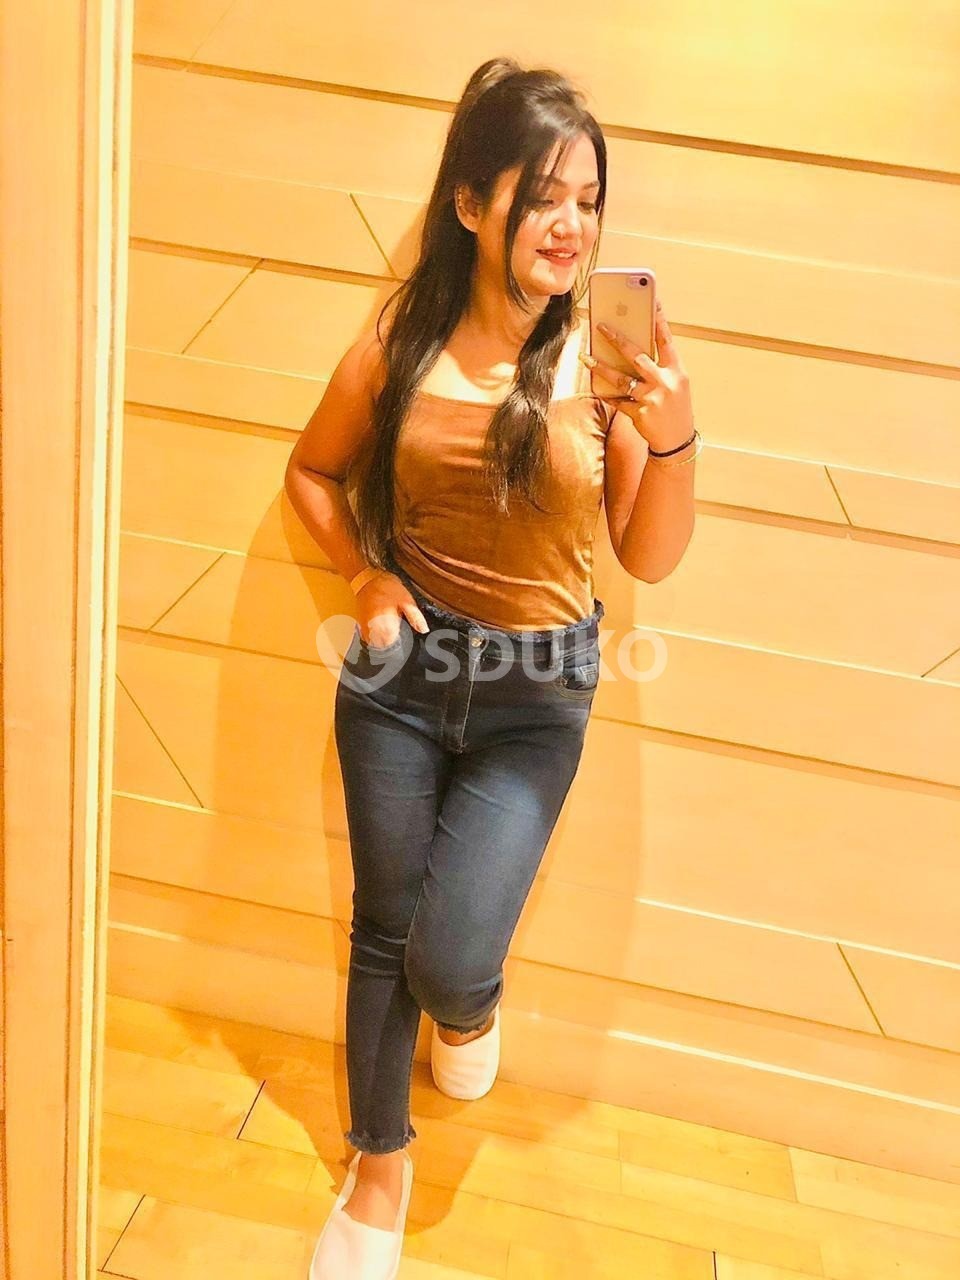 24X7 SERVICE AVAILABLE IN VELACHERY 100% SAFE AND SECURE TODAY LOW PRICE UNLIMITED ENJOY HOT COLLEGE GIRL HOUSEWIFE AUNT